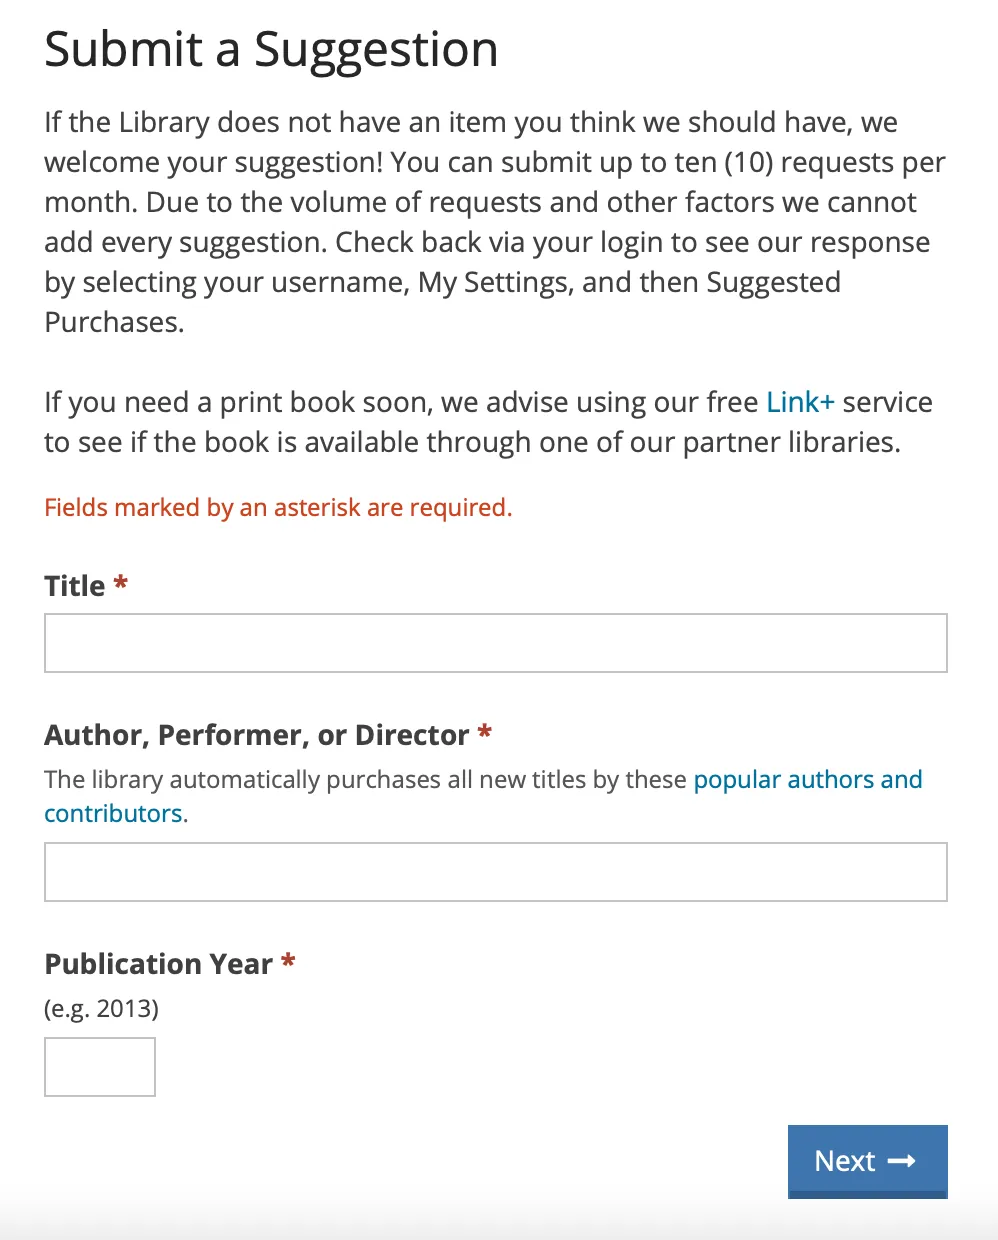 Modal on the SFPL website to submit an acquisition suggestion